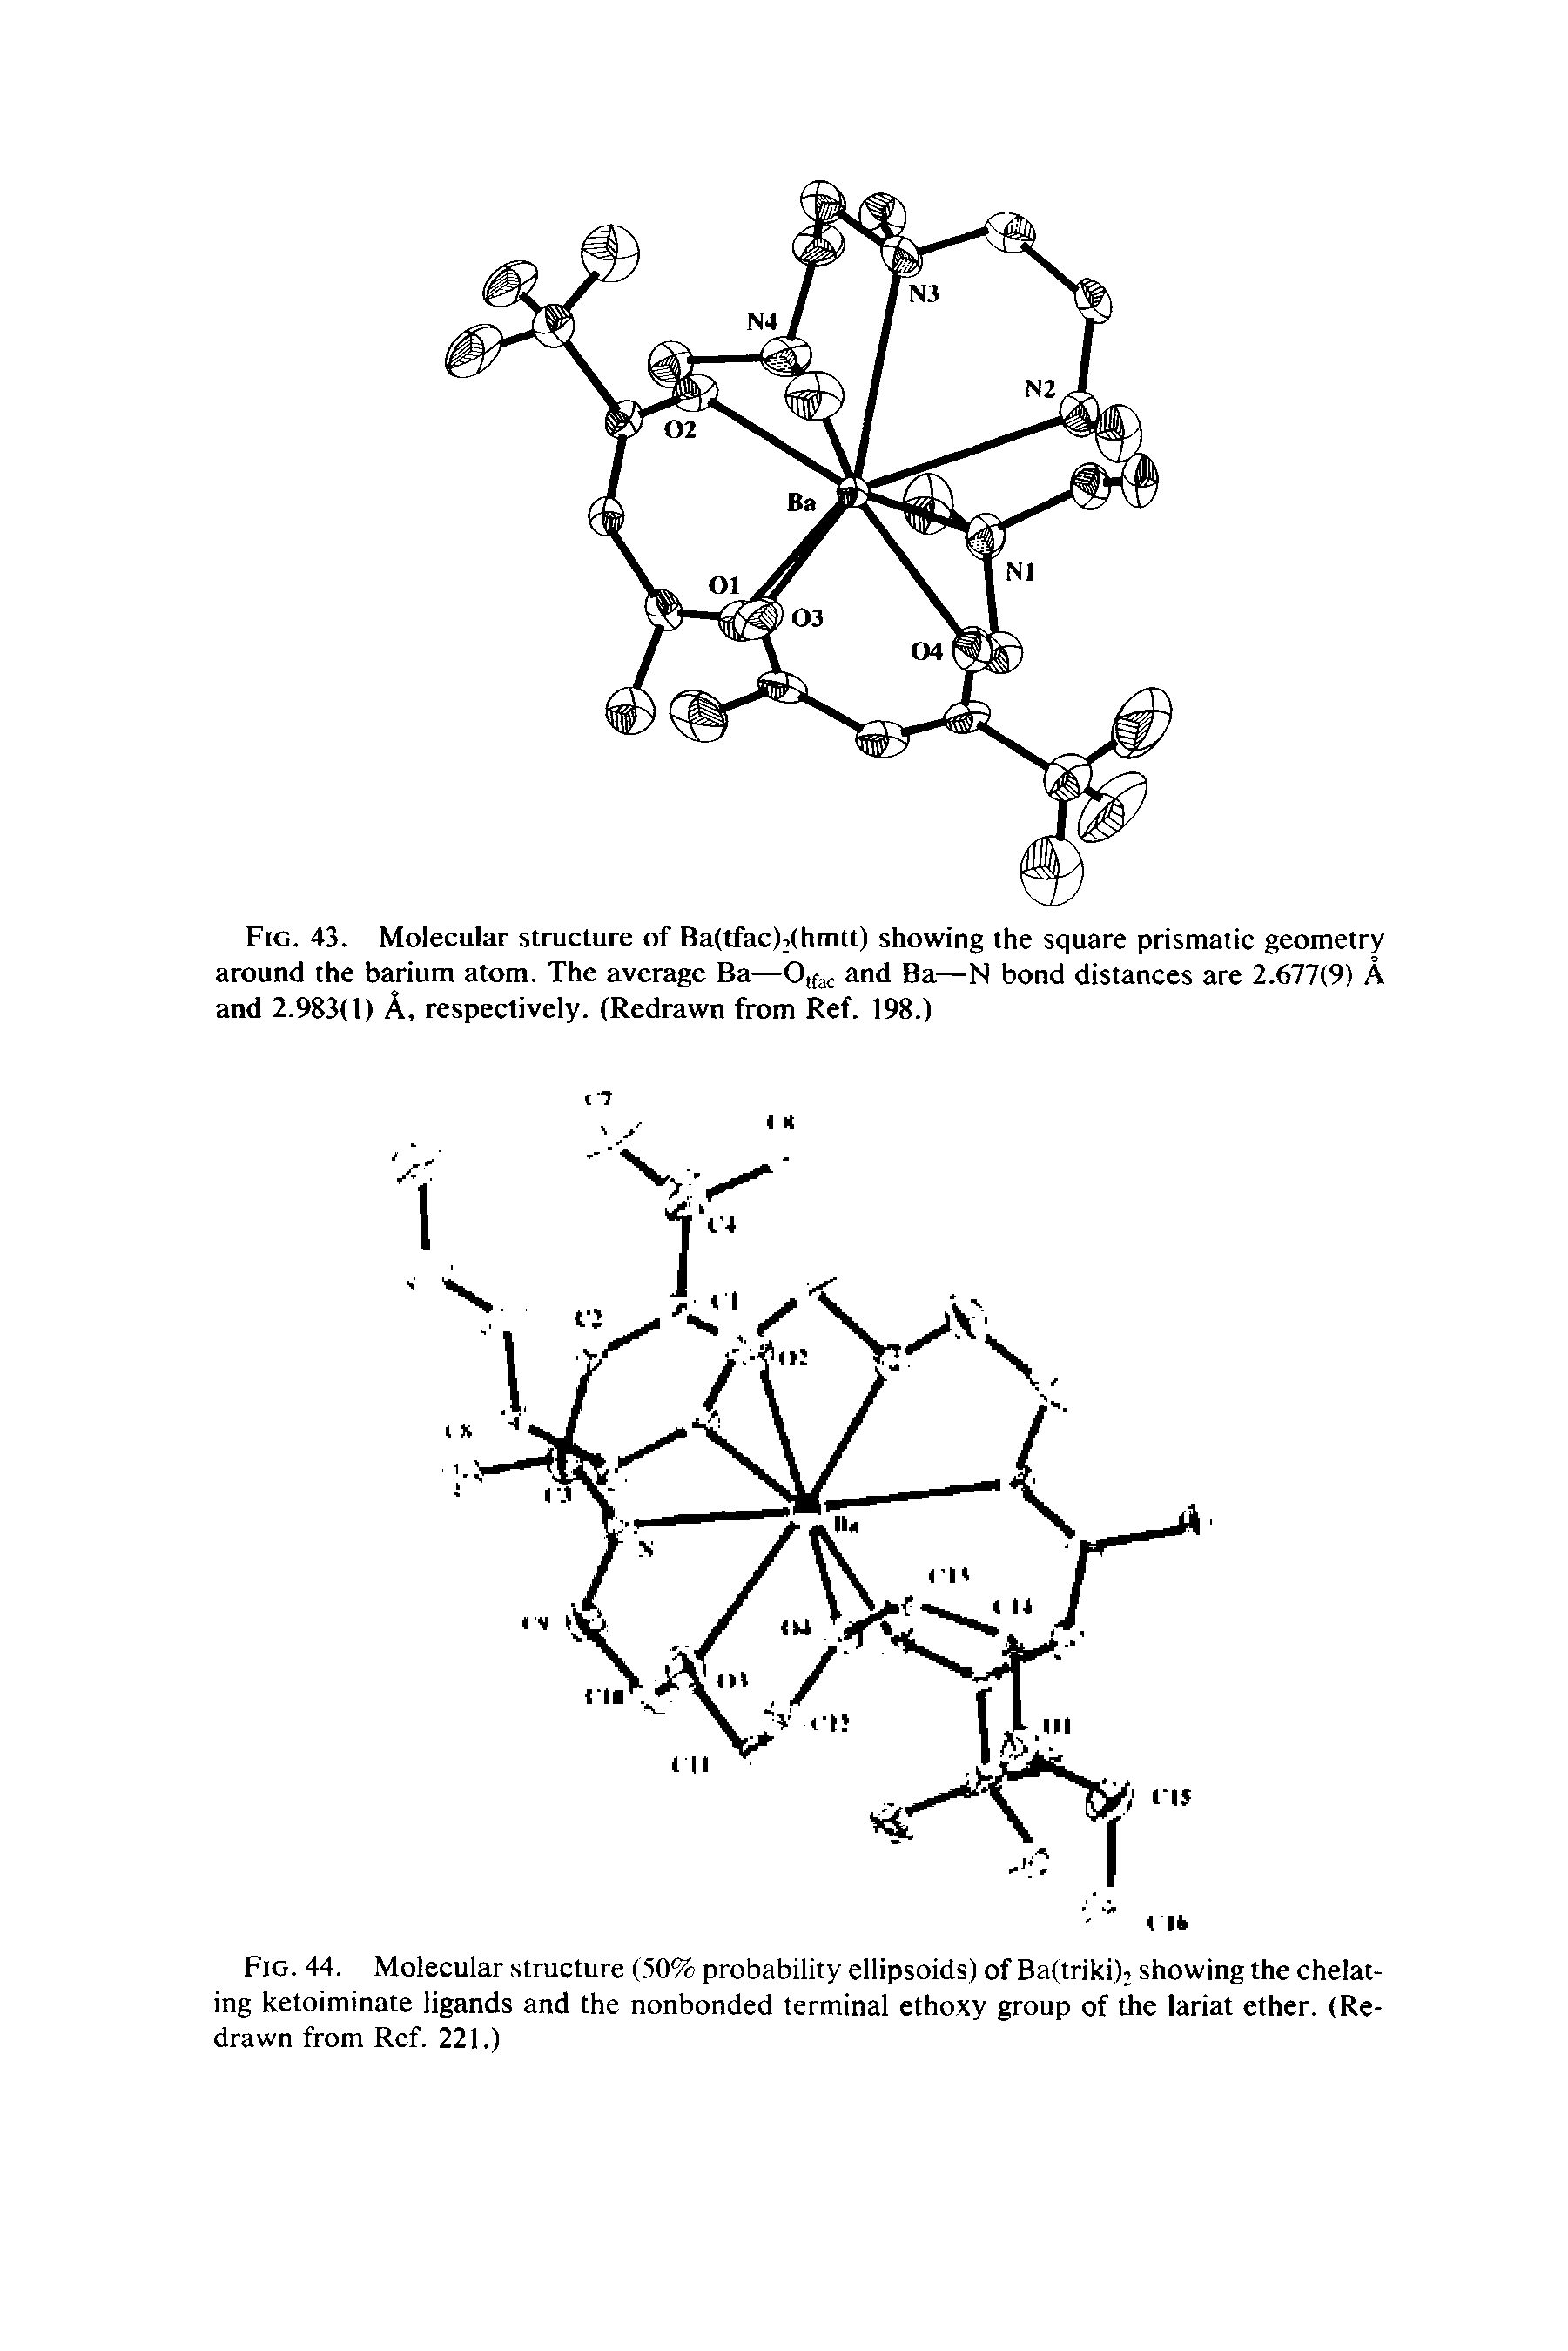 Fig. 44. Molecular structure (50% probability ellipsoids) of Baltriki), showing the chelating ketoiminate ligands and the nonbonded terminal ethoxy group of the lariat ether. (Redrawn from Ref. 221.)...